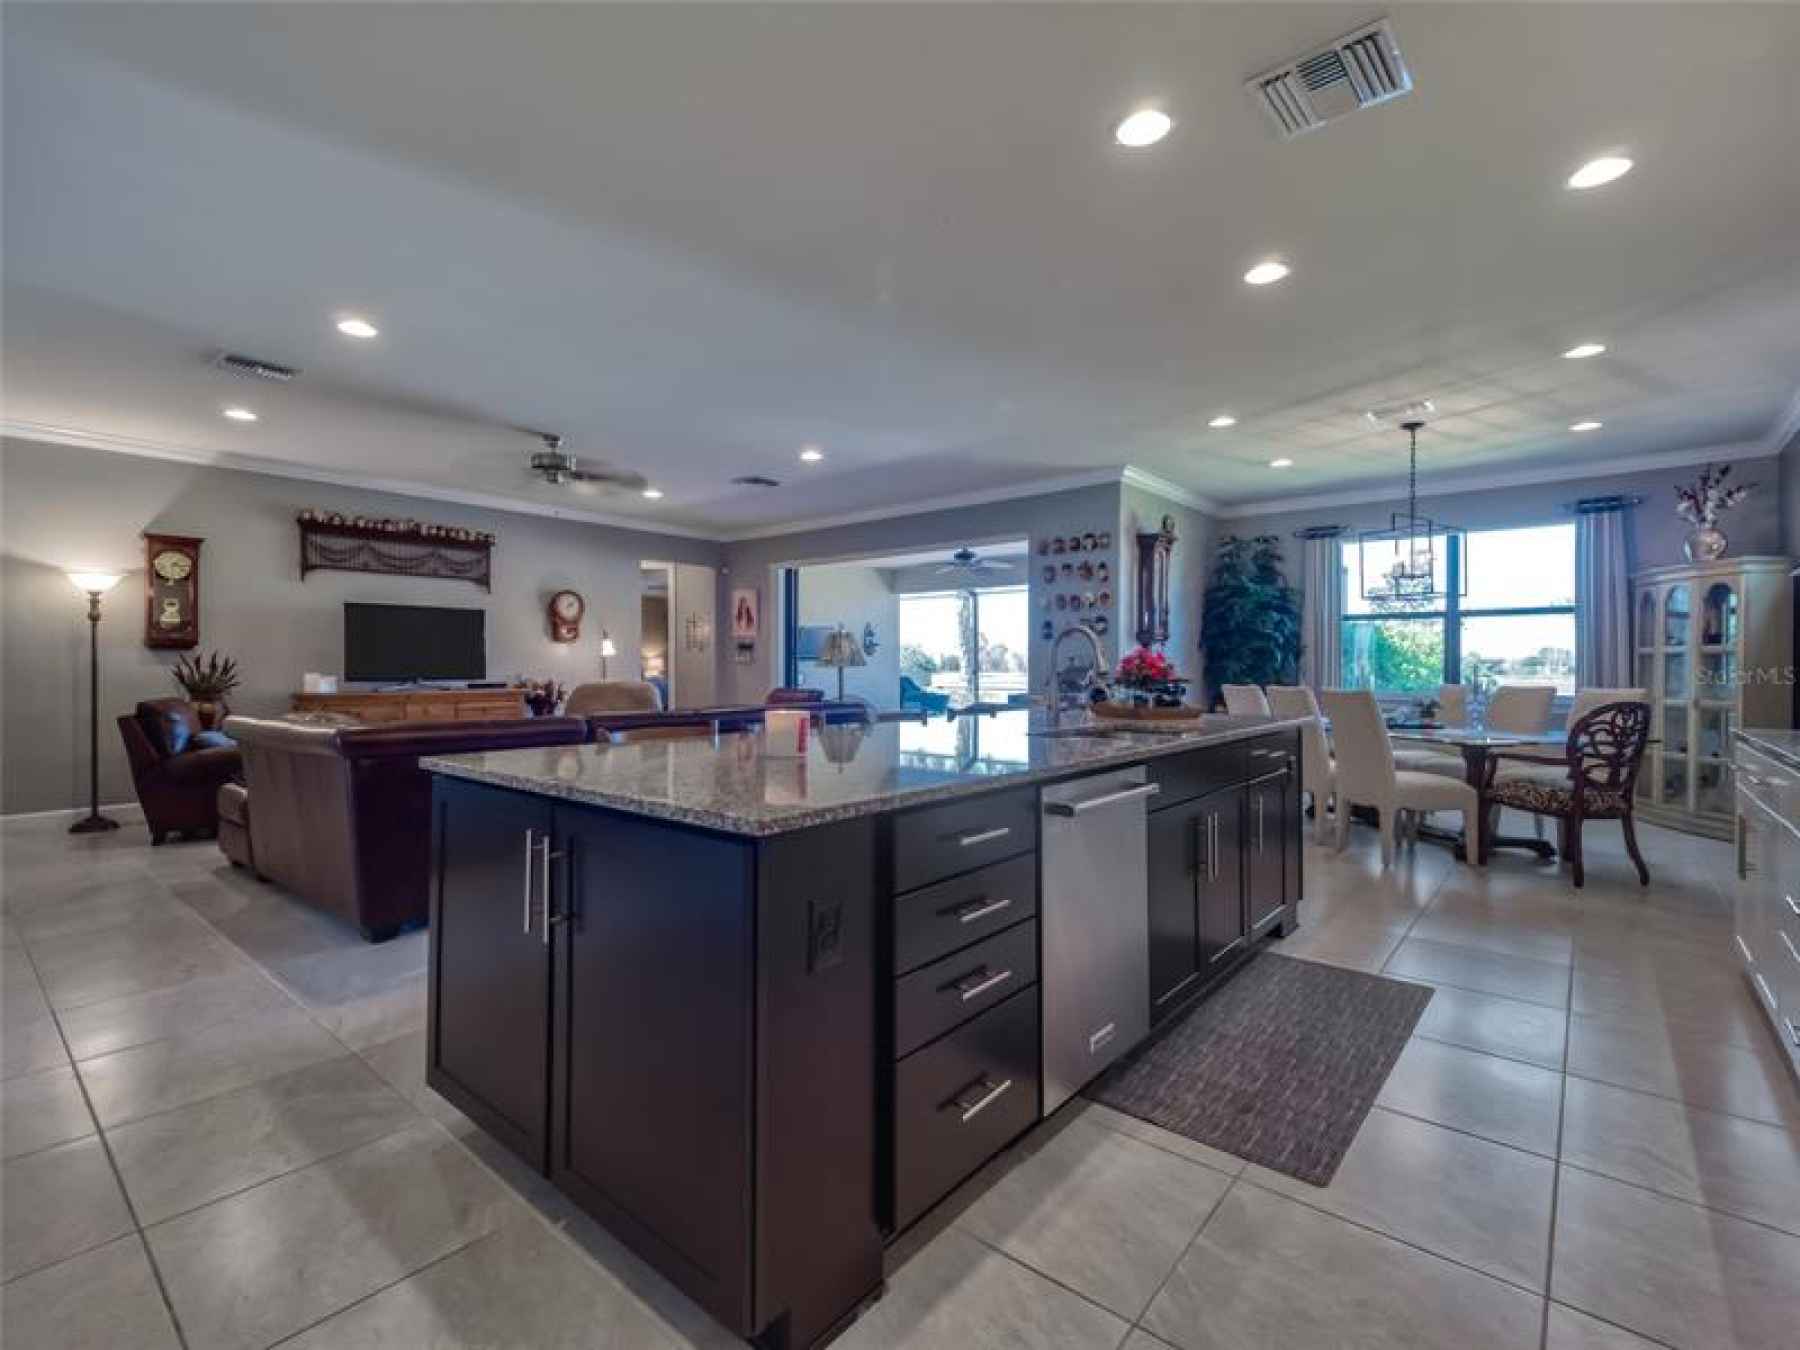 Kitchen, Dining Room, Great Room - Open Concept